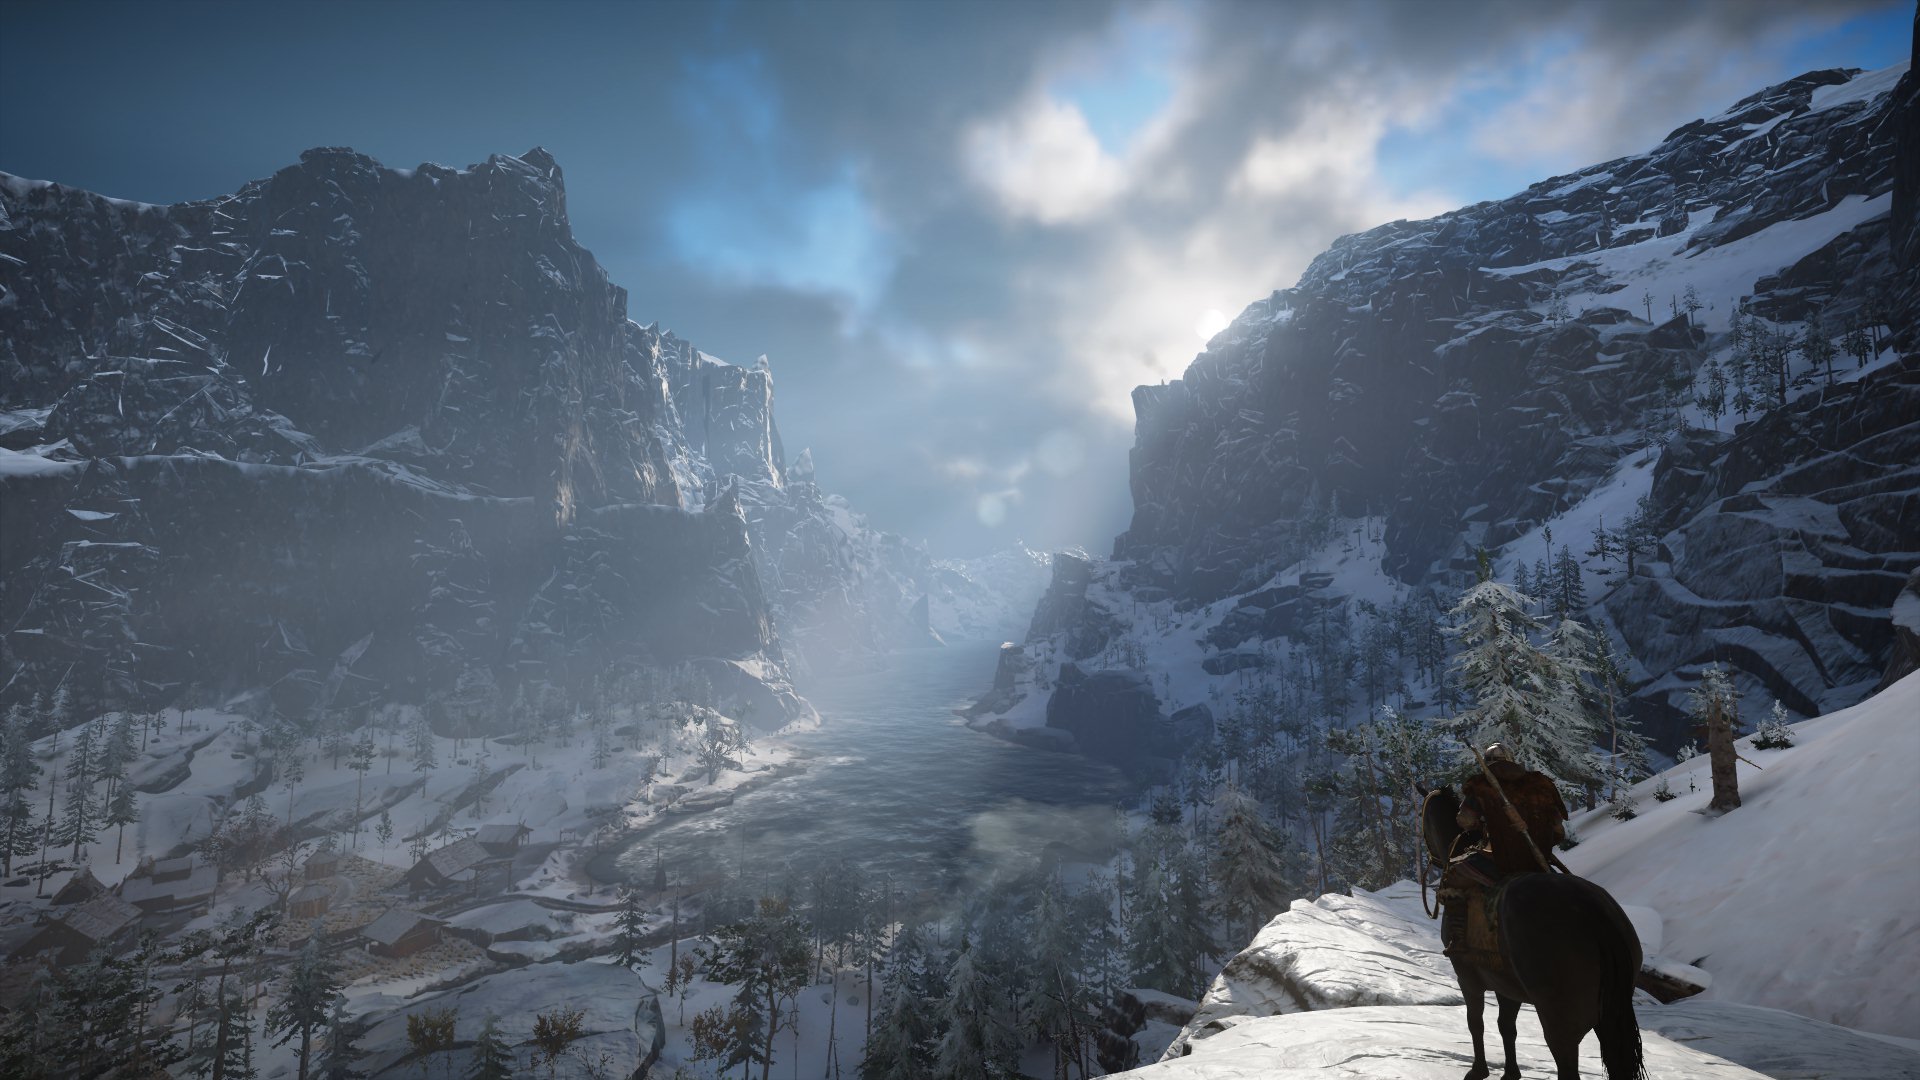 General 1920x1080 Assassin's Creed Assassin's Creed: Valhalla video games CGI snow mountains nature clouds horse Ubisoft